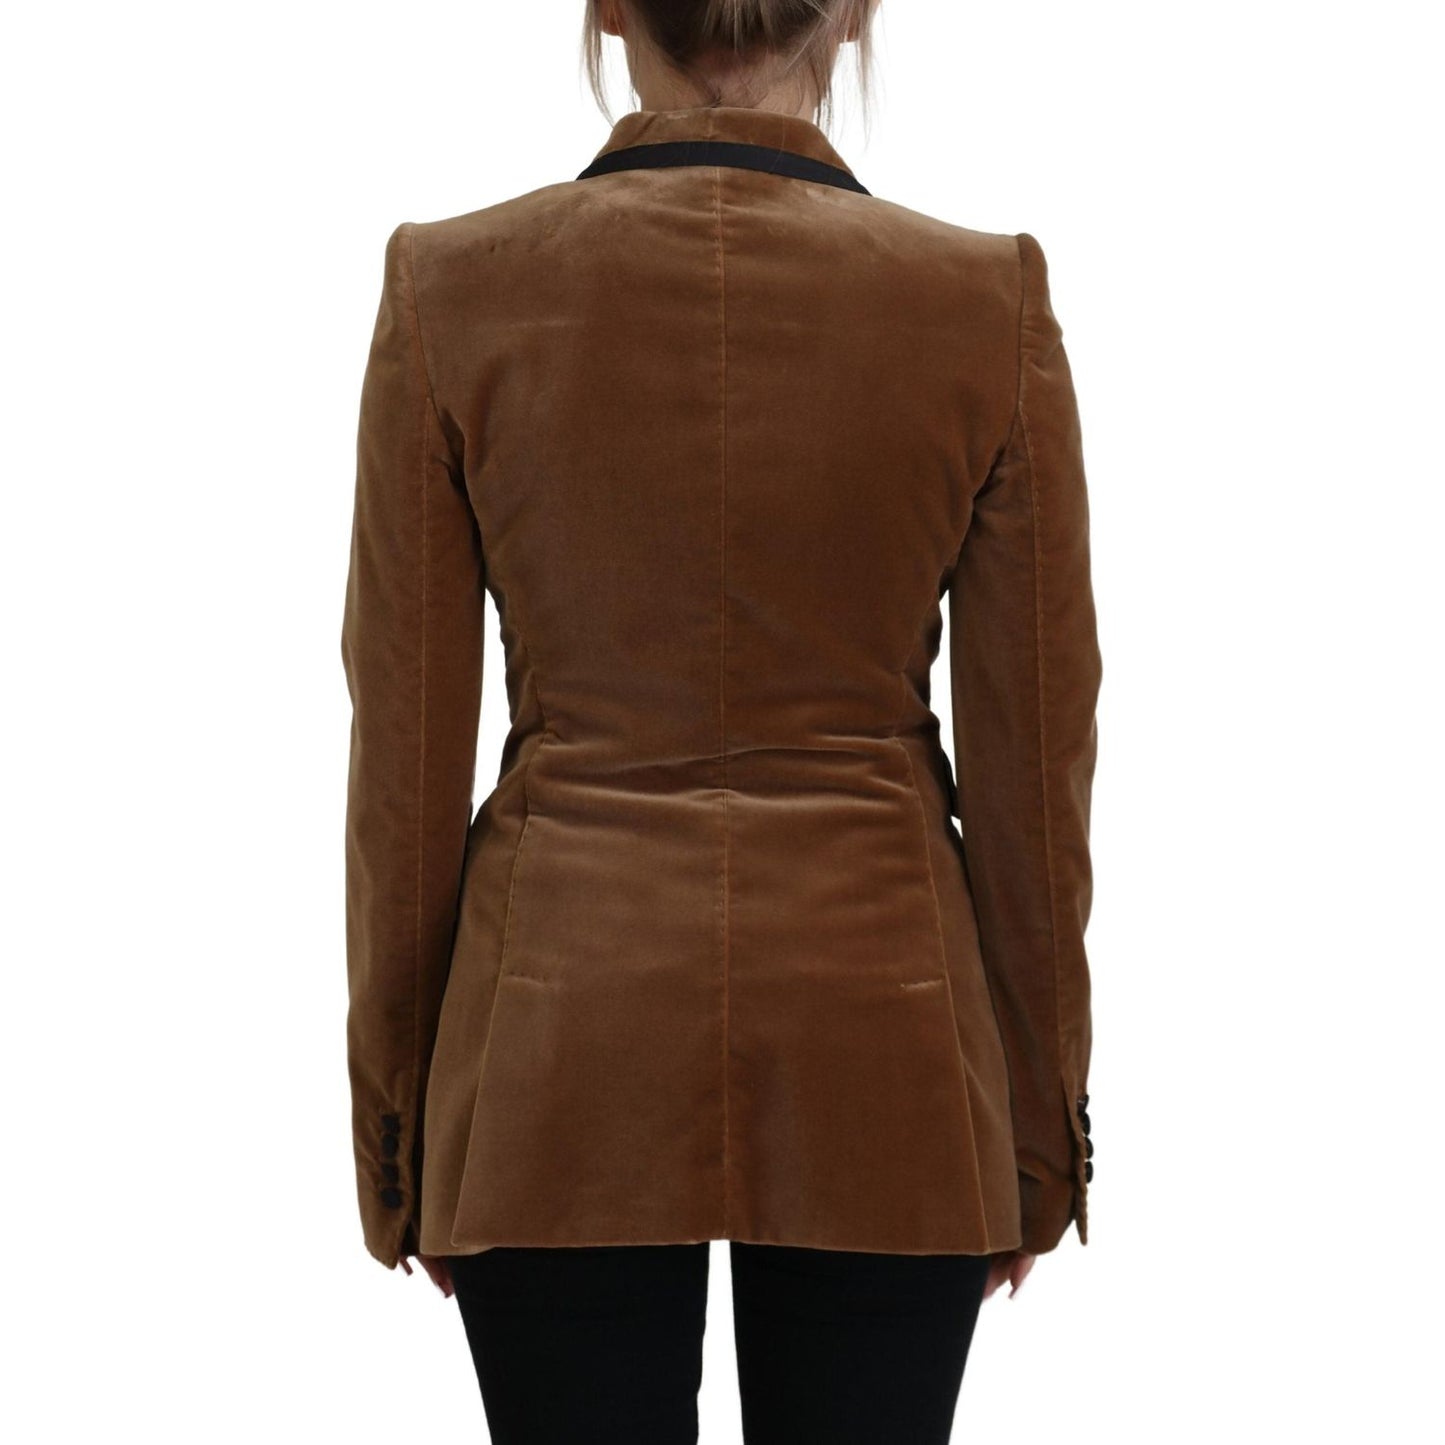 Dolce & Gabbana Elegant Double Breasted Brown Blazer Jacket brown-double-breasted-blazer-cotton-jacket